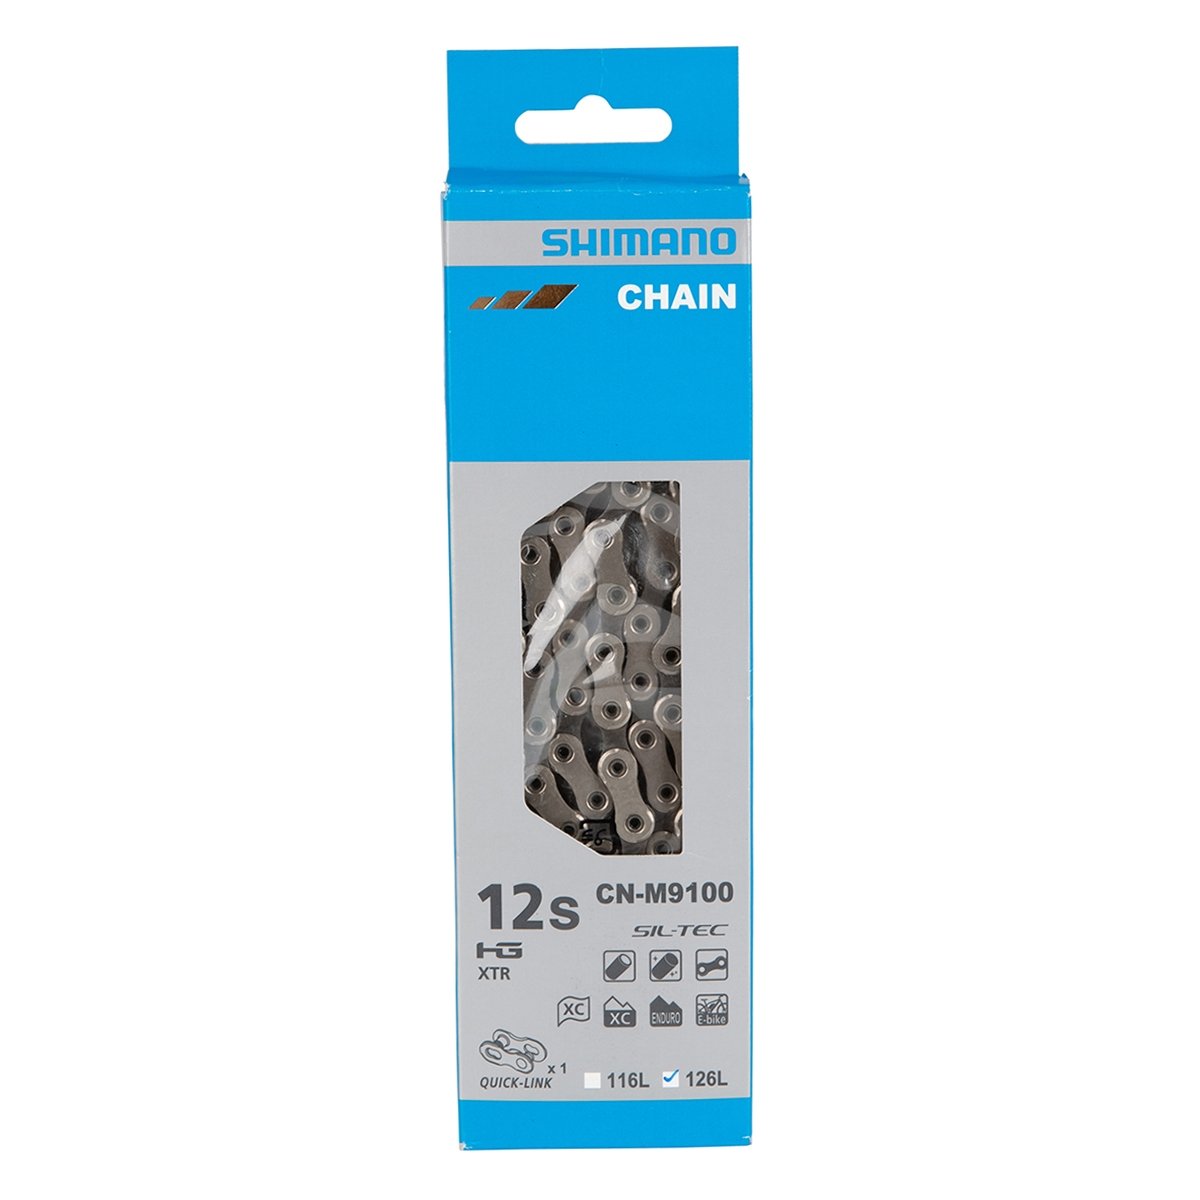 Shimano MTB Chain CN-M9100 126 Links, 12-Speed, with Master Link